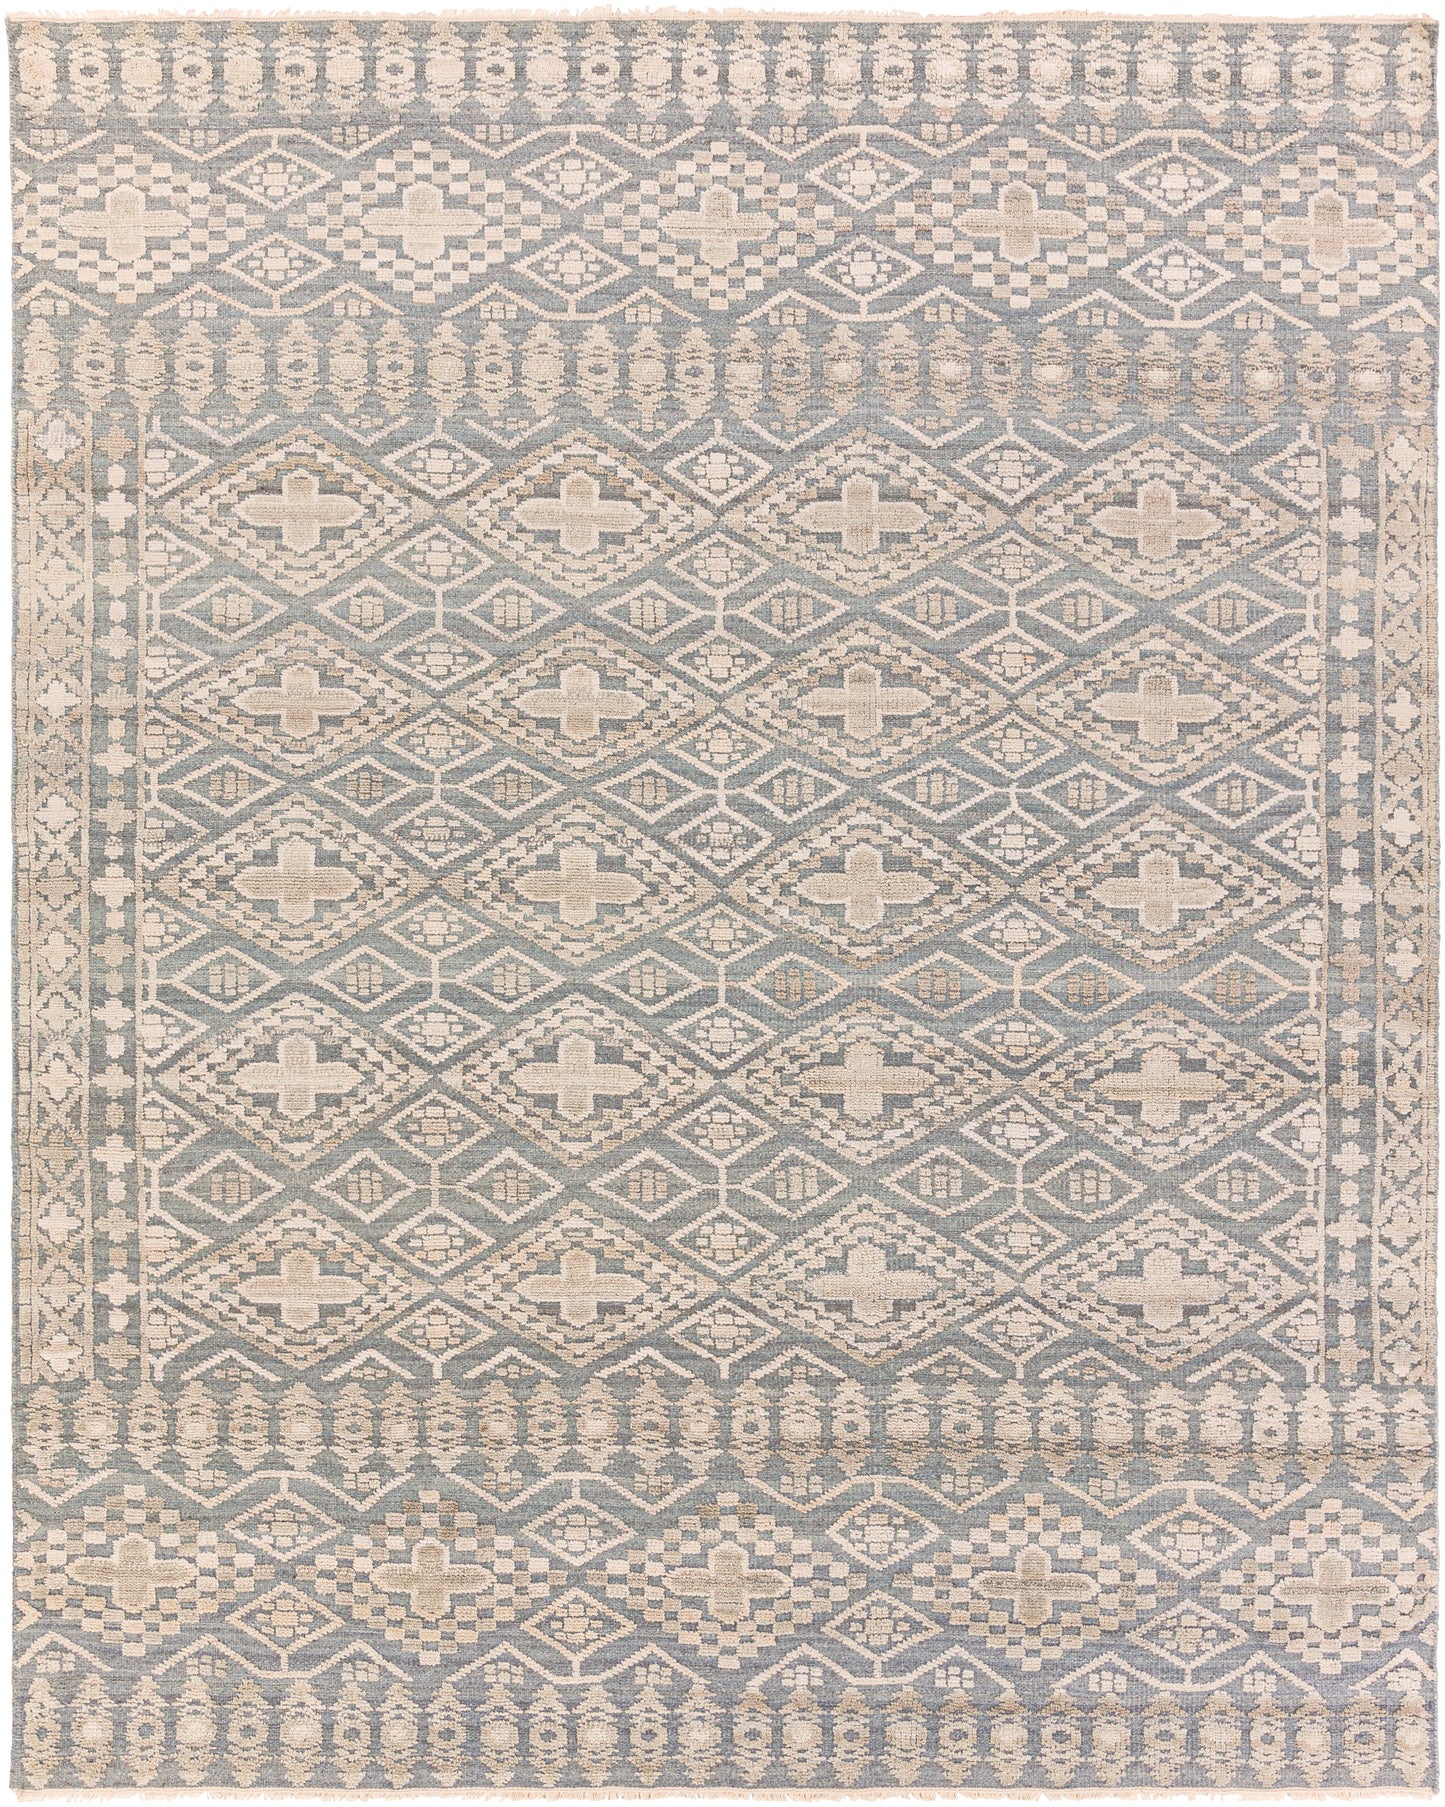 Nobility 24154 Hand Knotted Wool Indoor Area Rug by Surya Rugs